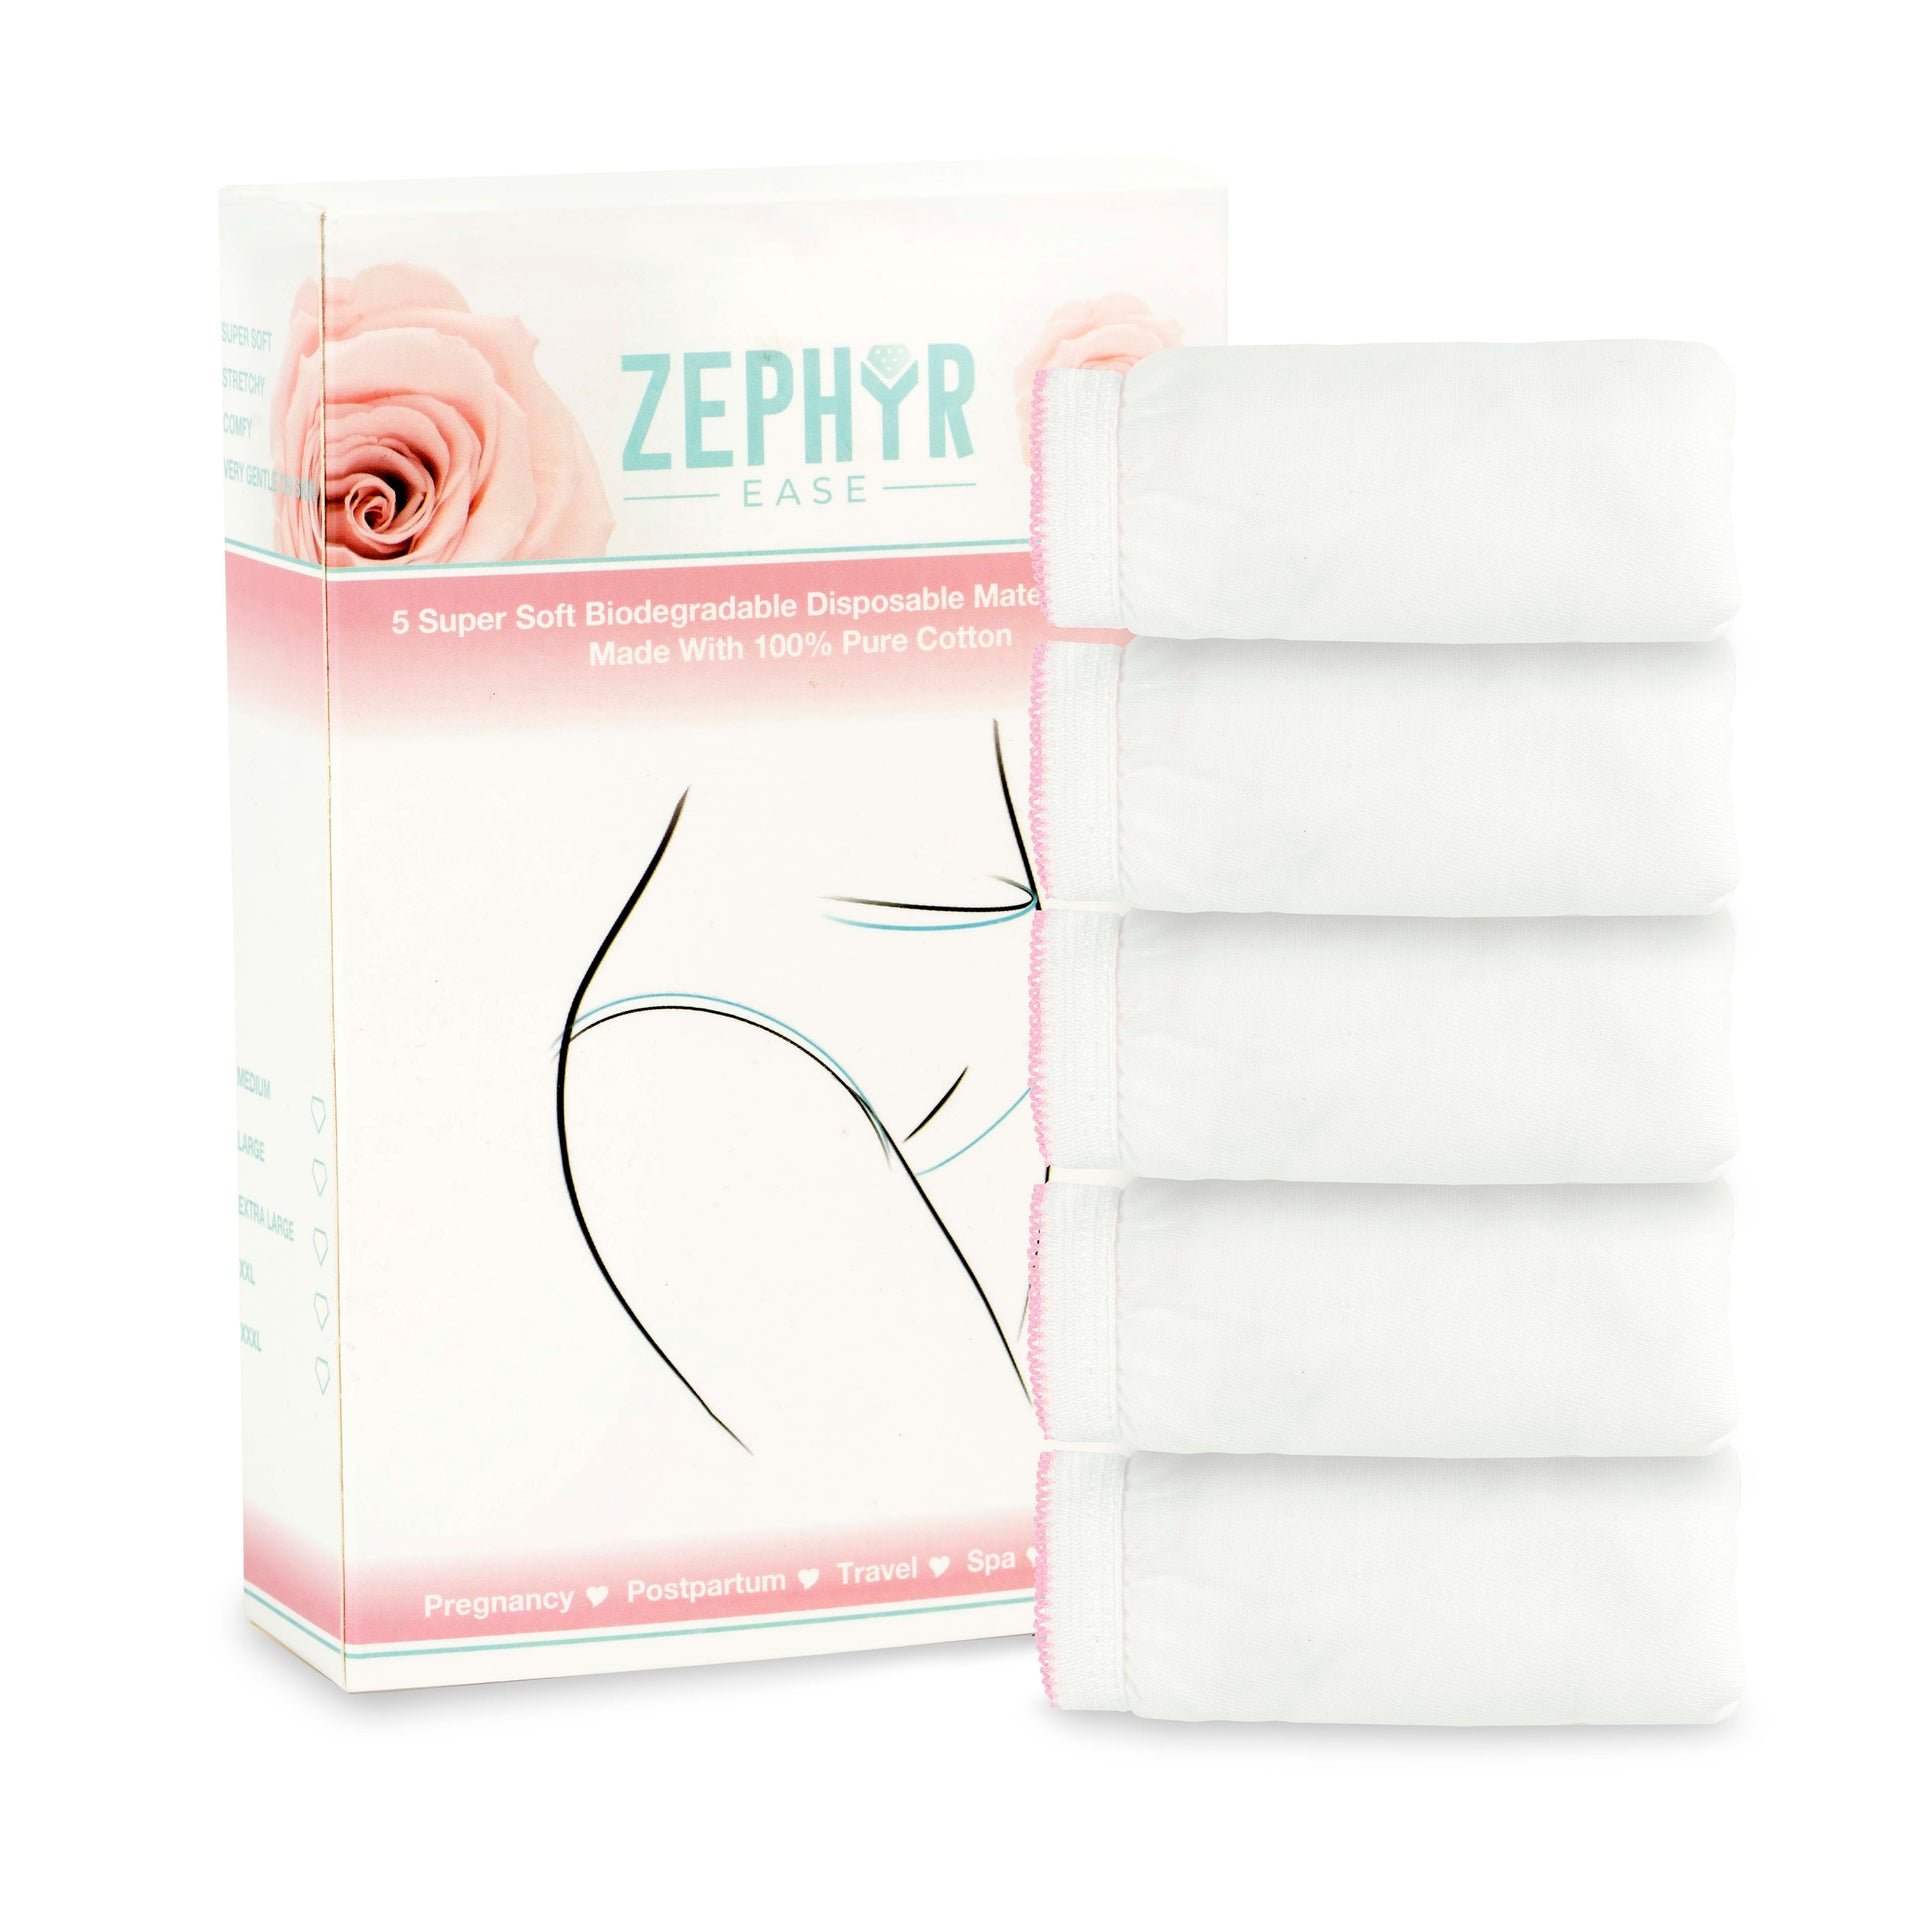 C Section Recovery Panties (Set of 2)  Panties to Wear after C Sectio –  Zephyr Ease